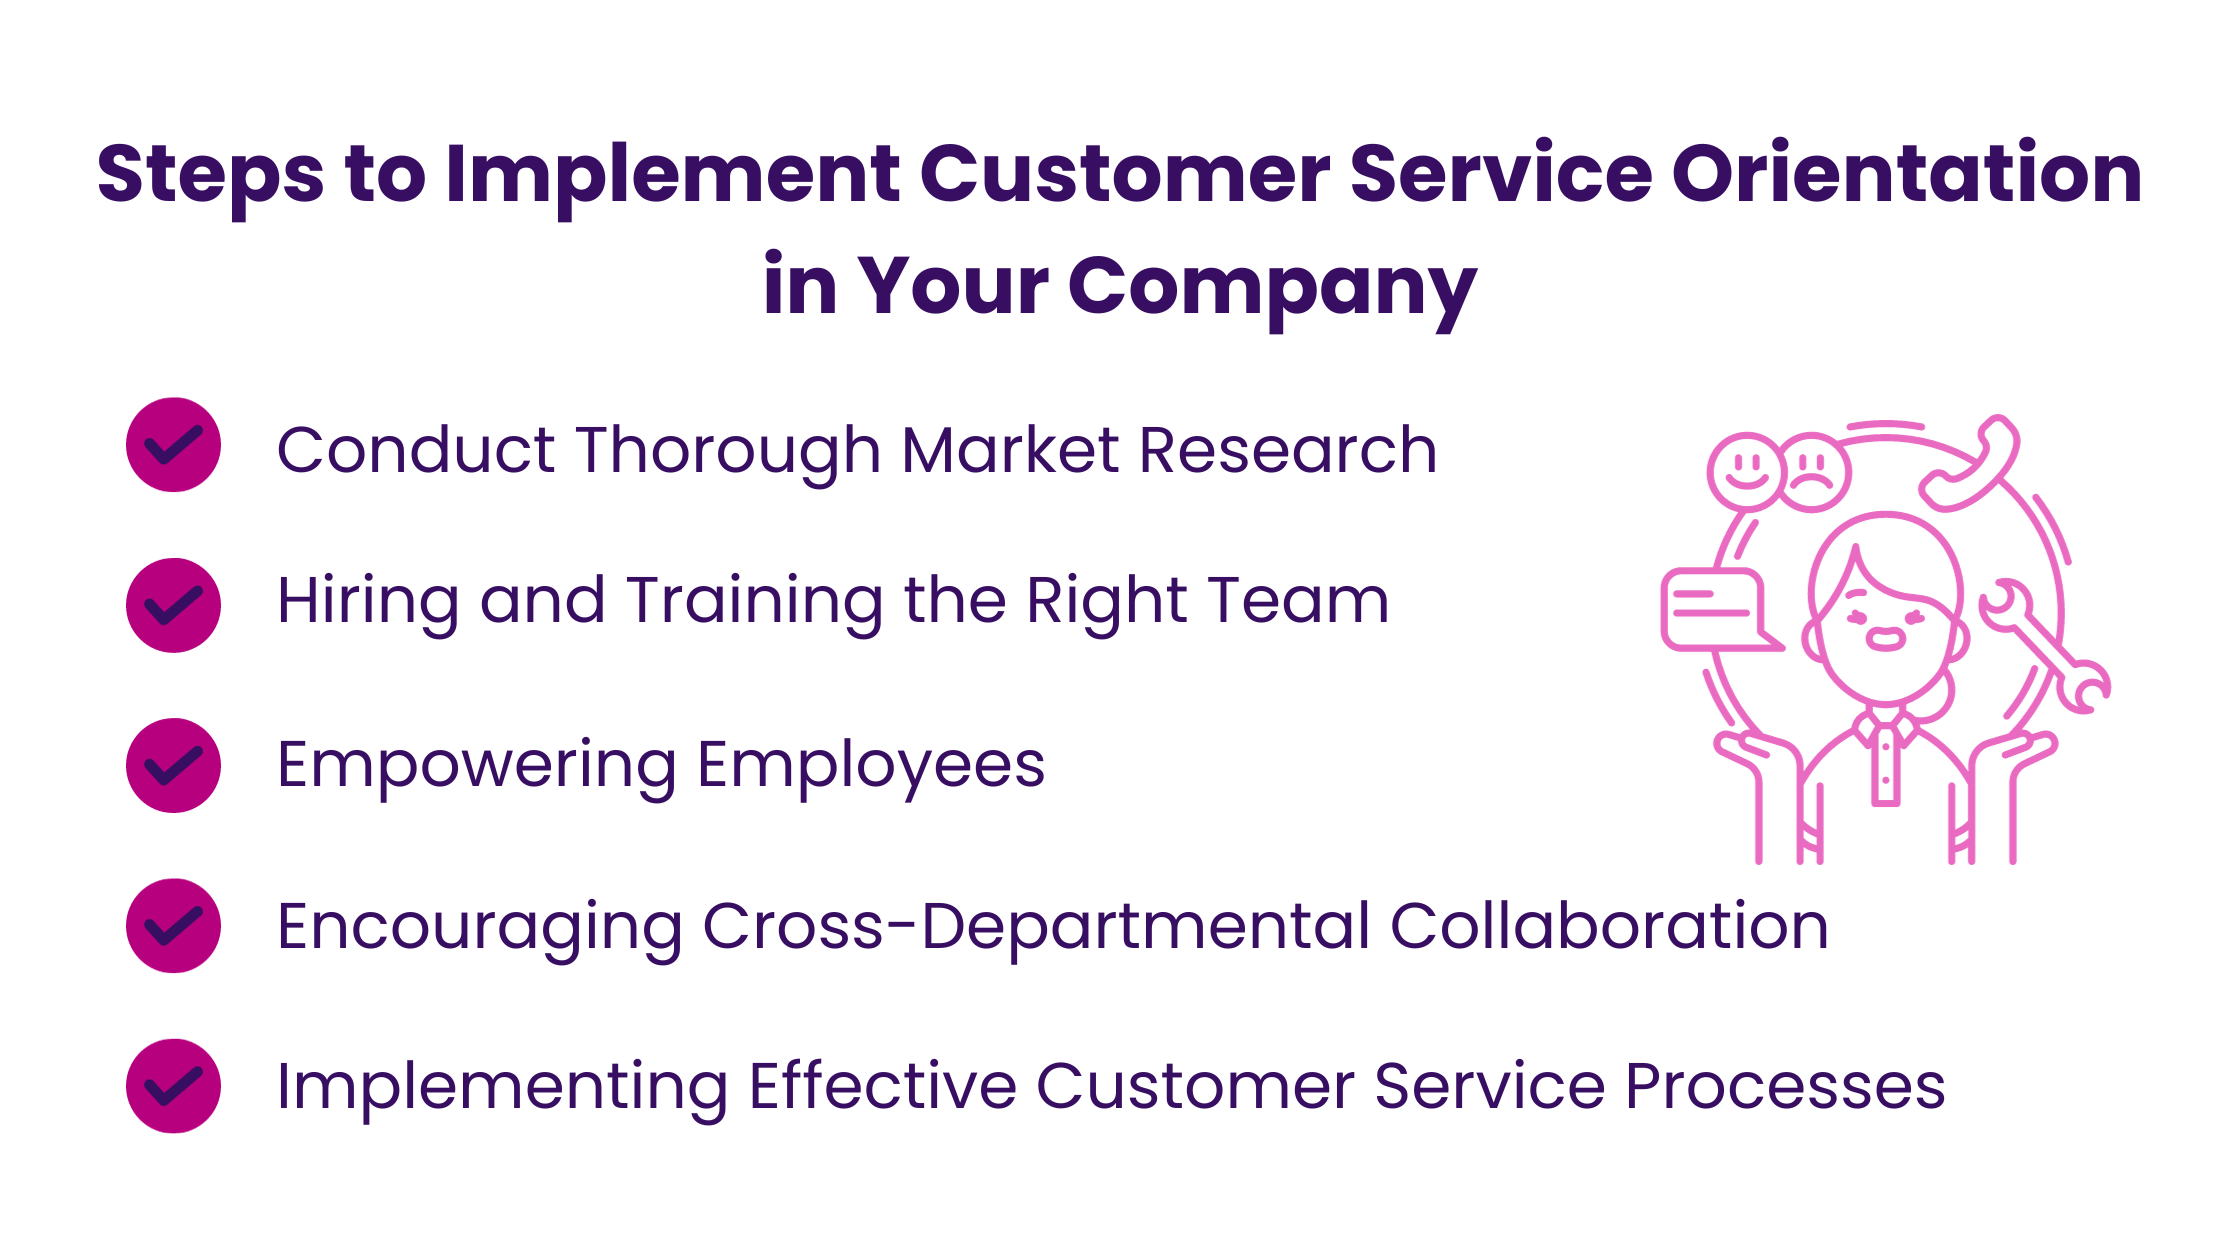 Steps to Implement Customer Service Orientation in Your Company